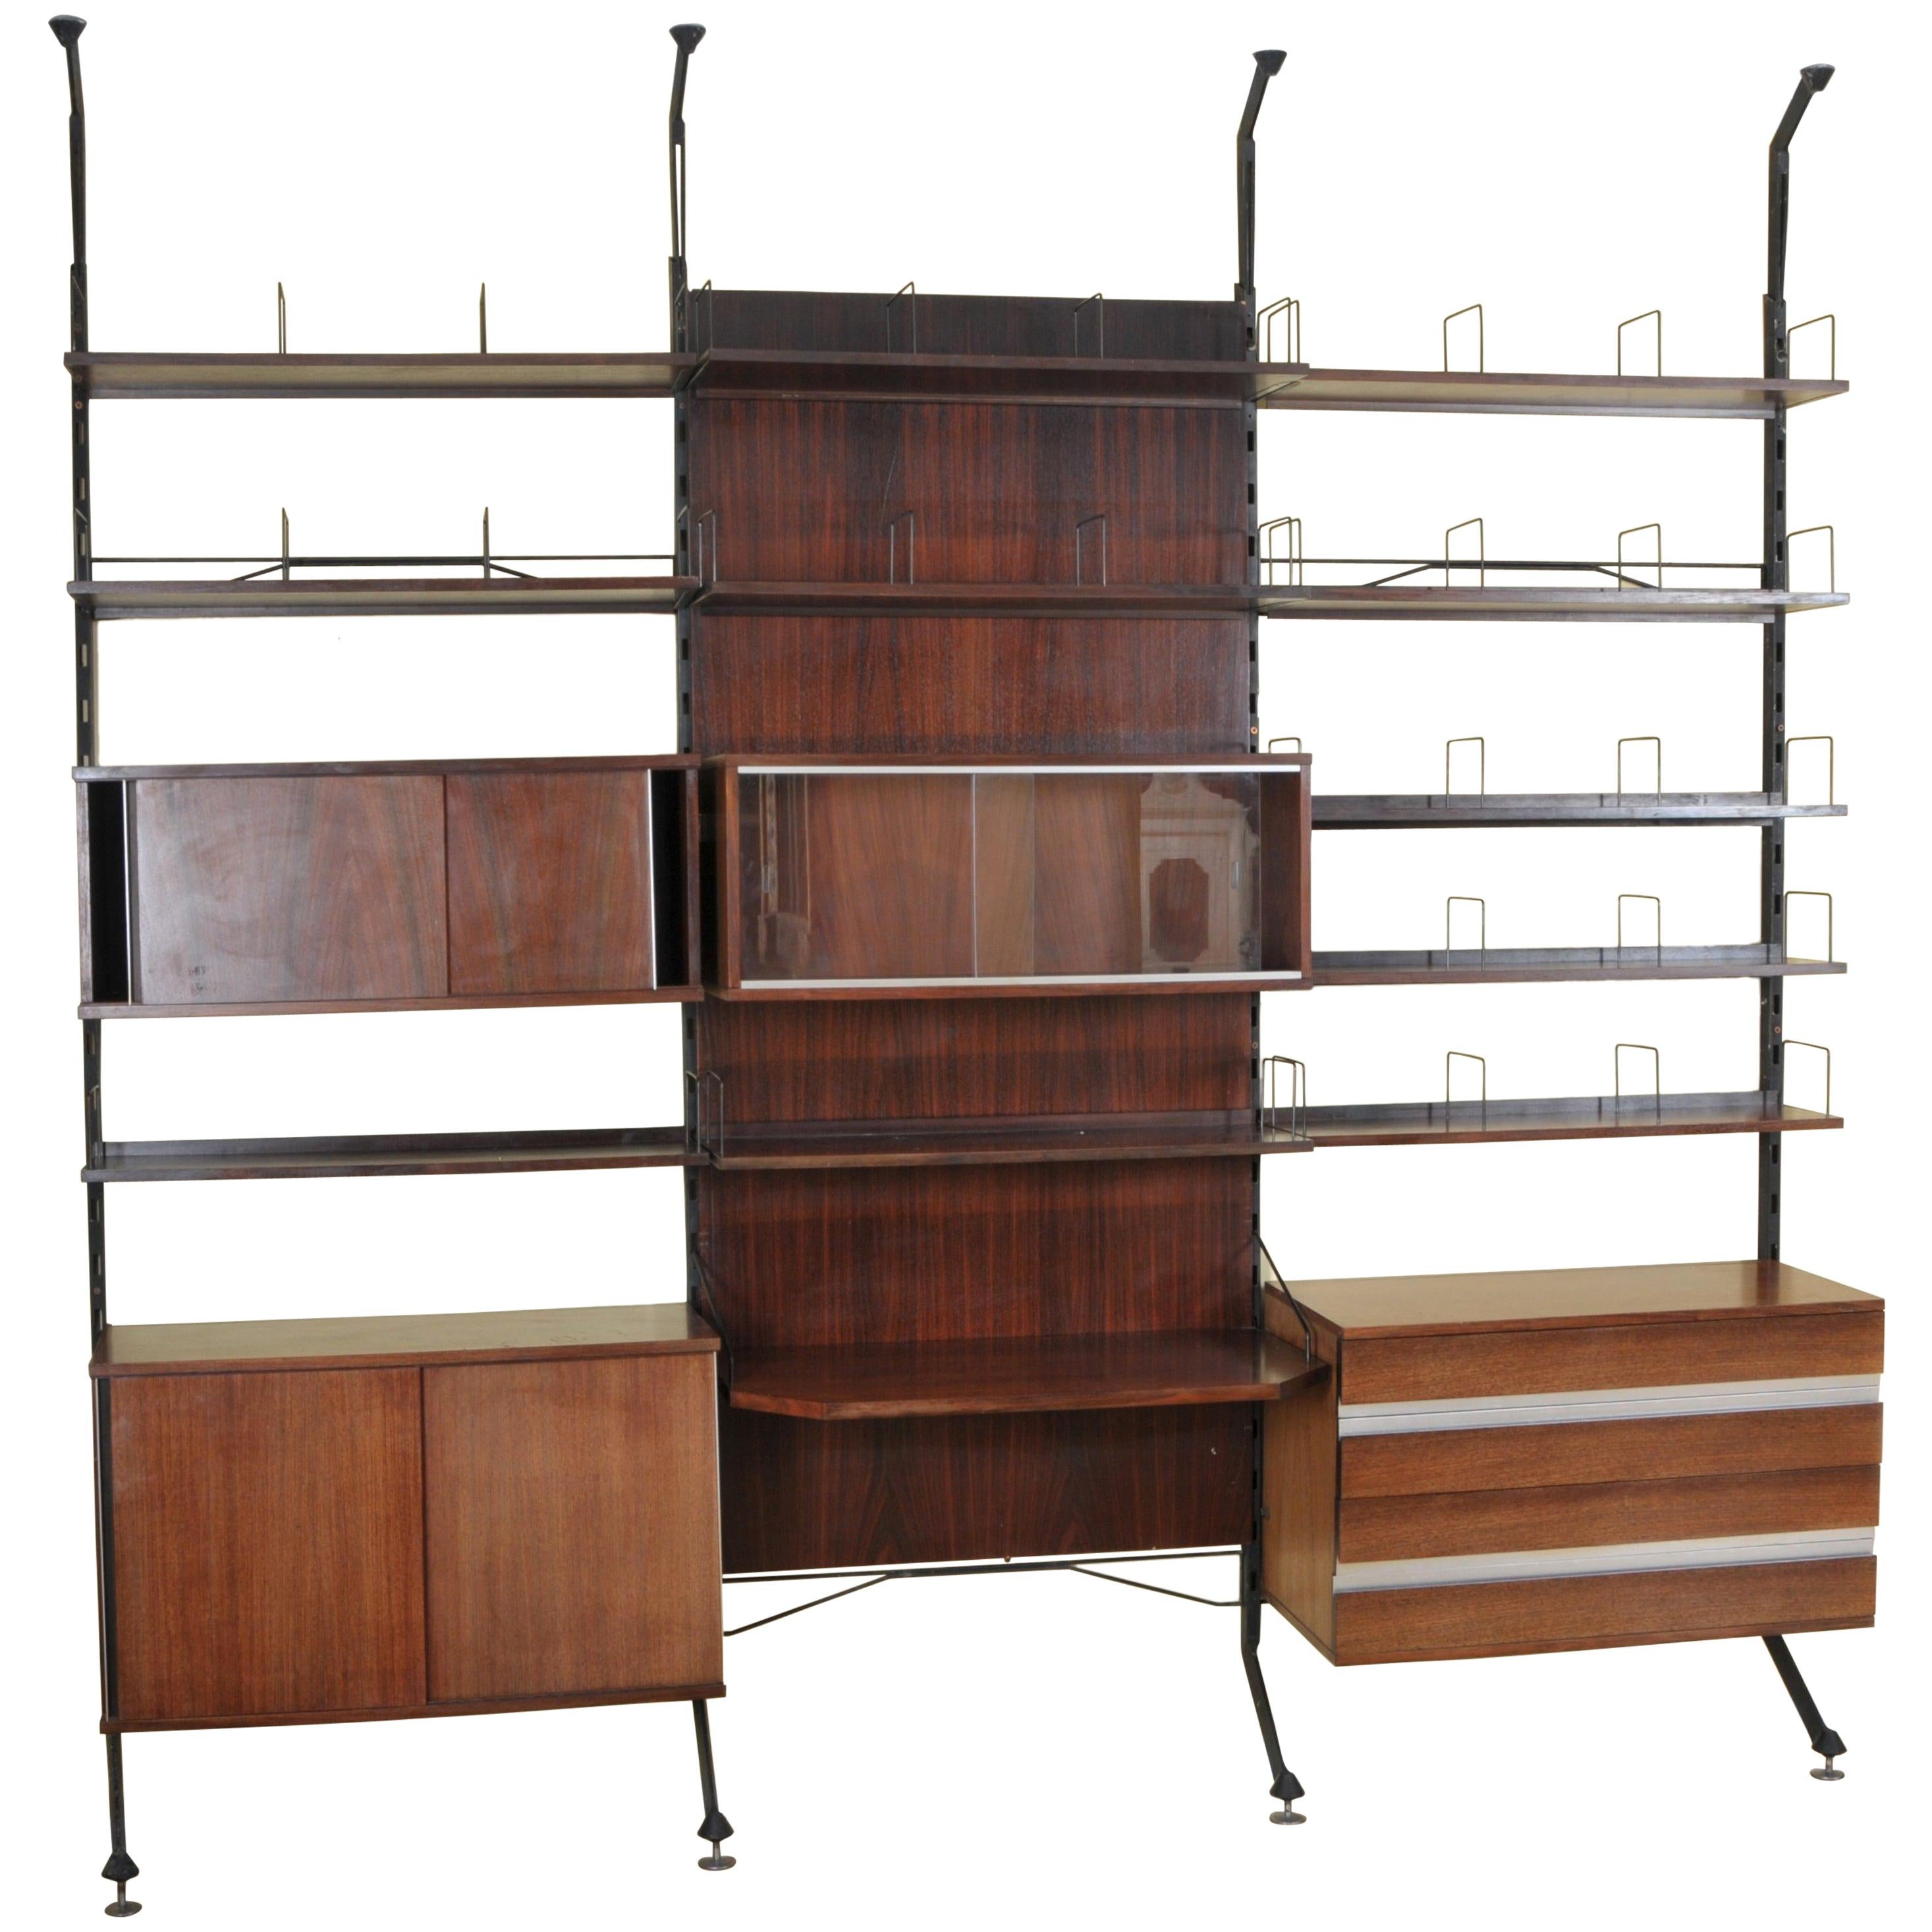 Urio Wall System by Ico Parisi for Mim Roma, 1960s, Italy Bookcase